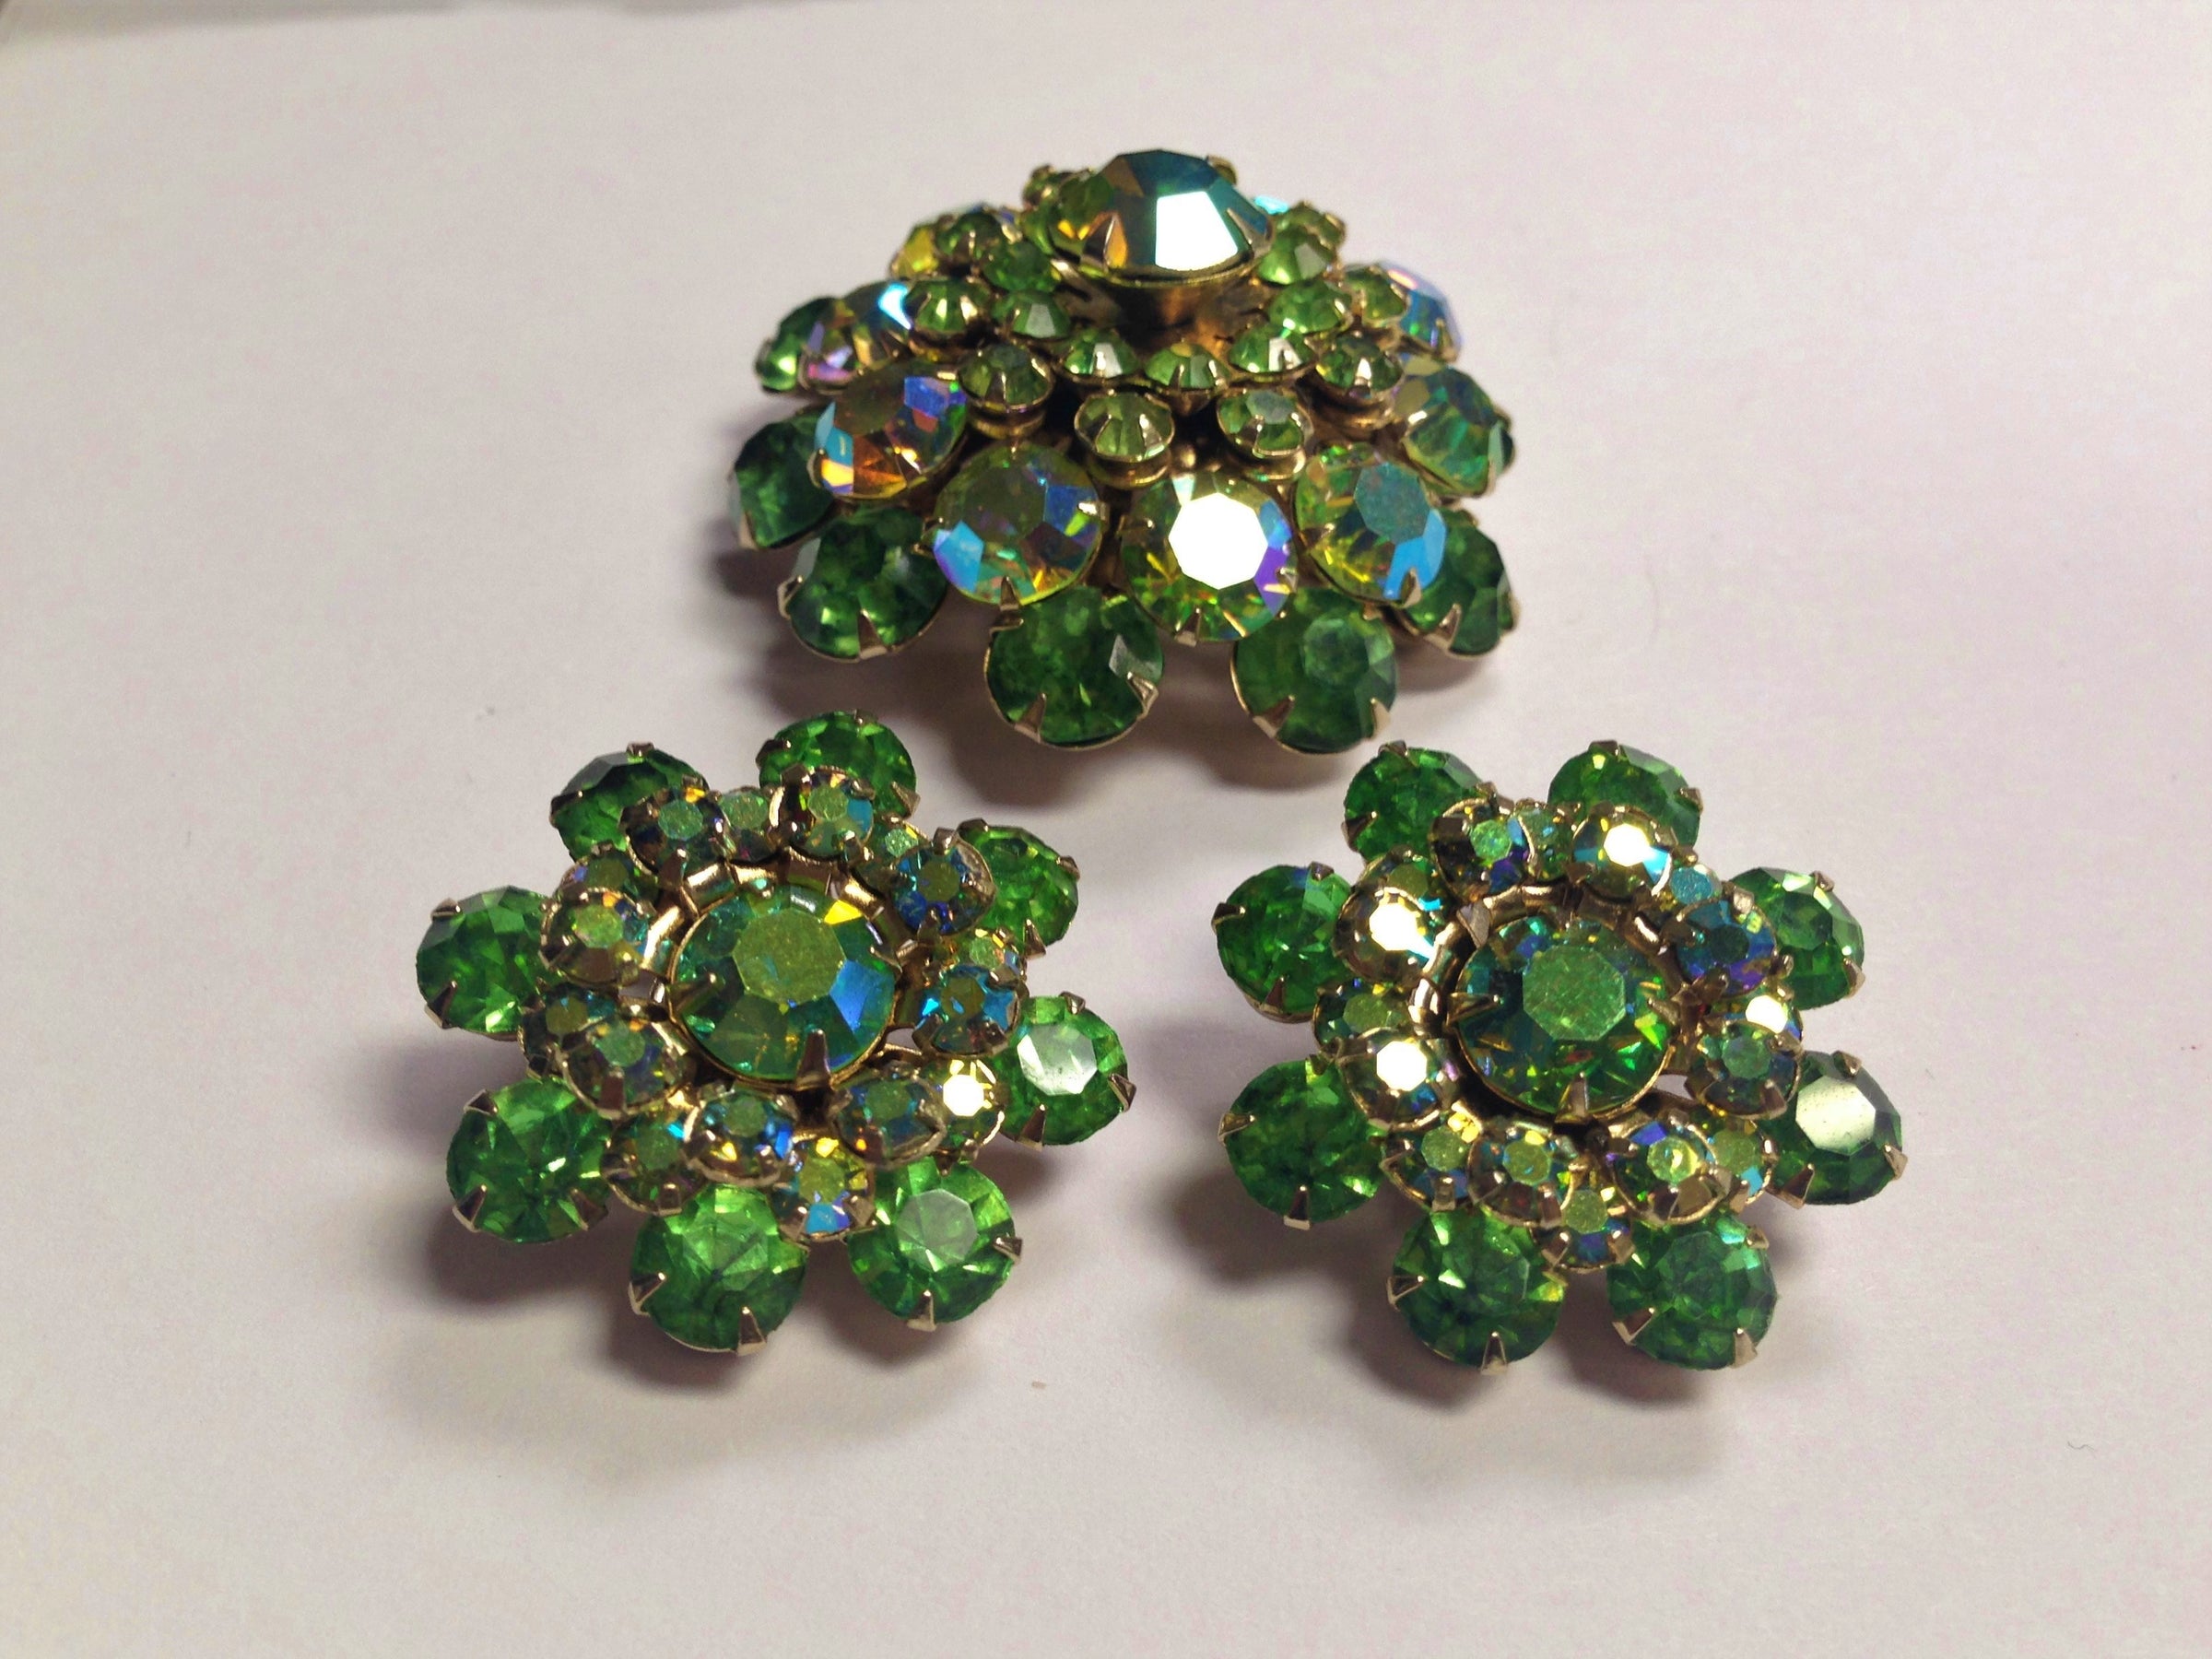 1960's Weiss Green AB Dome Brooch and Earring Set